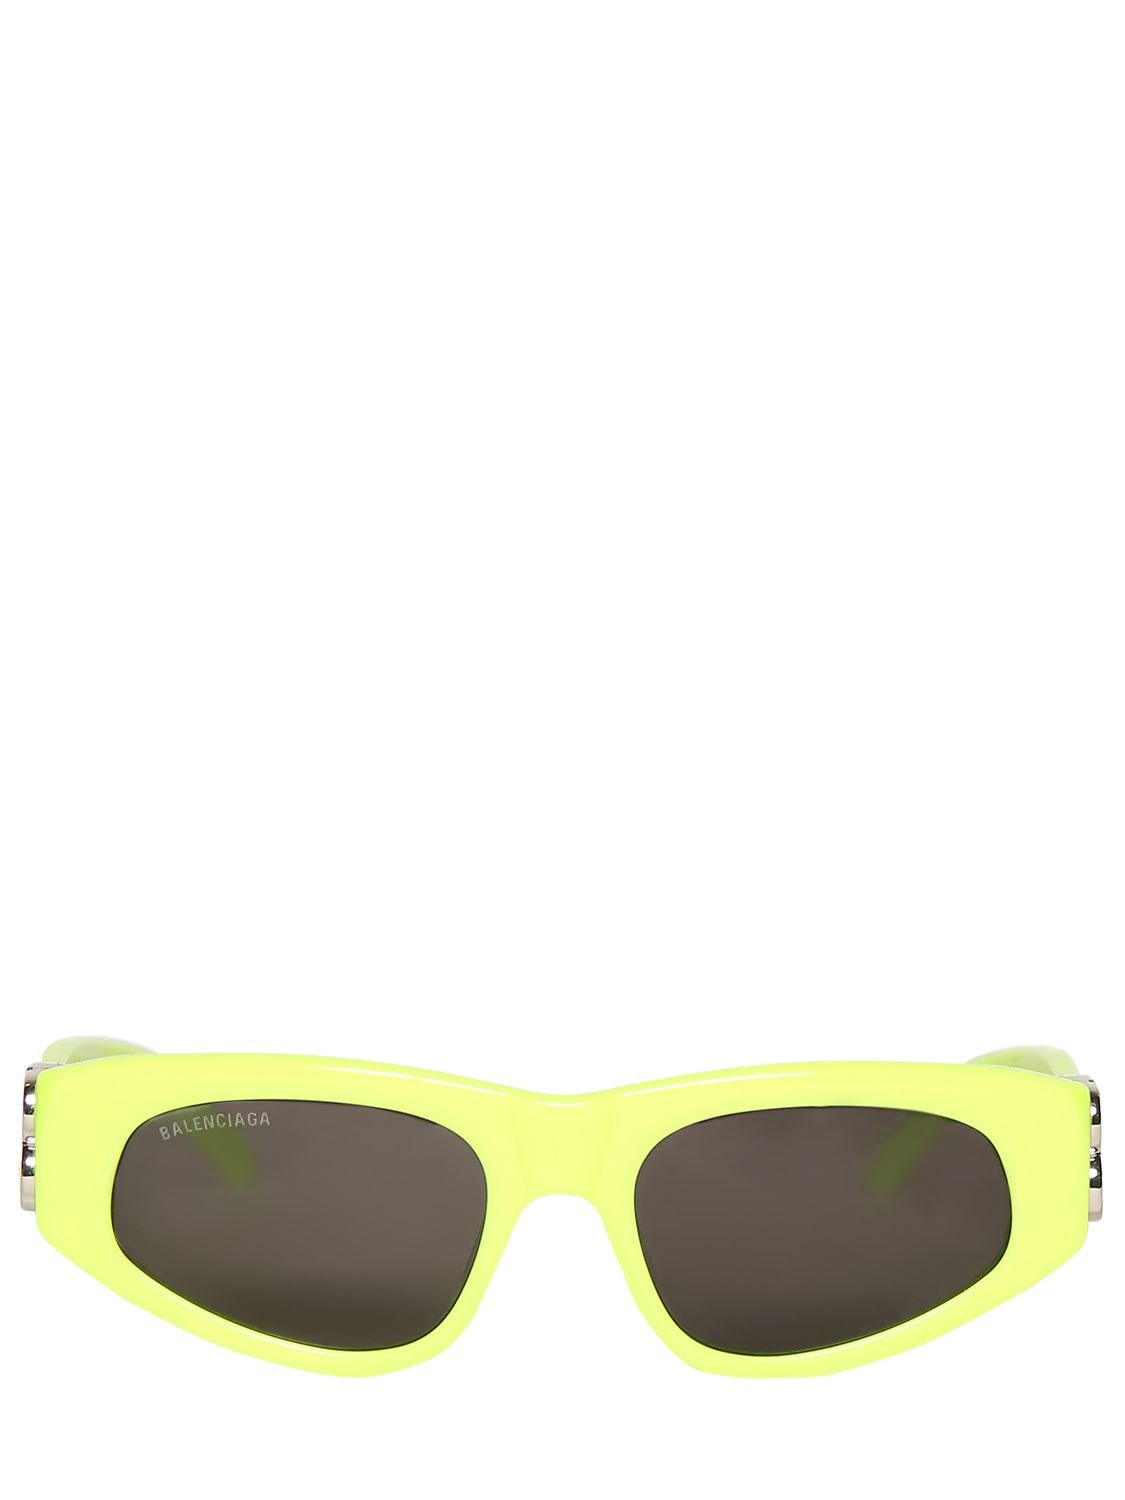 Image of 0095s Dynasty D-frame Acetate Sunglasses